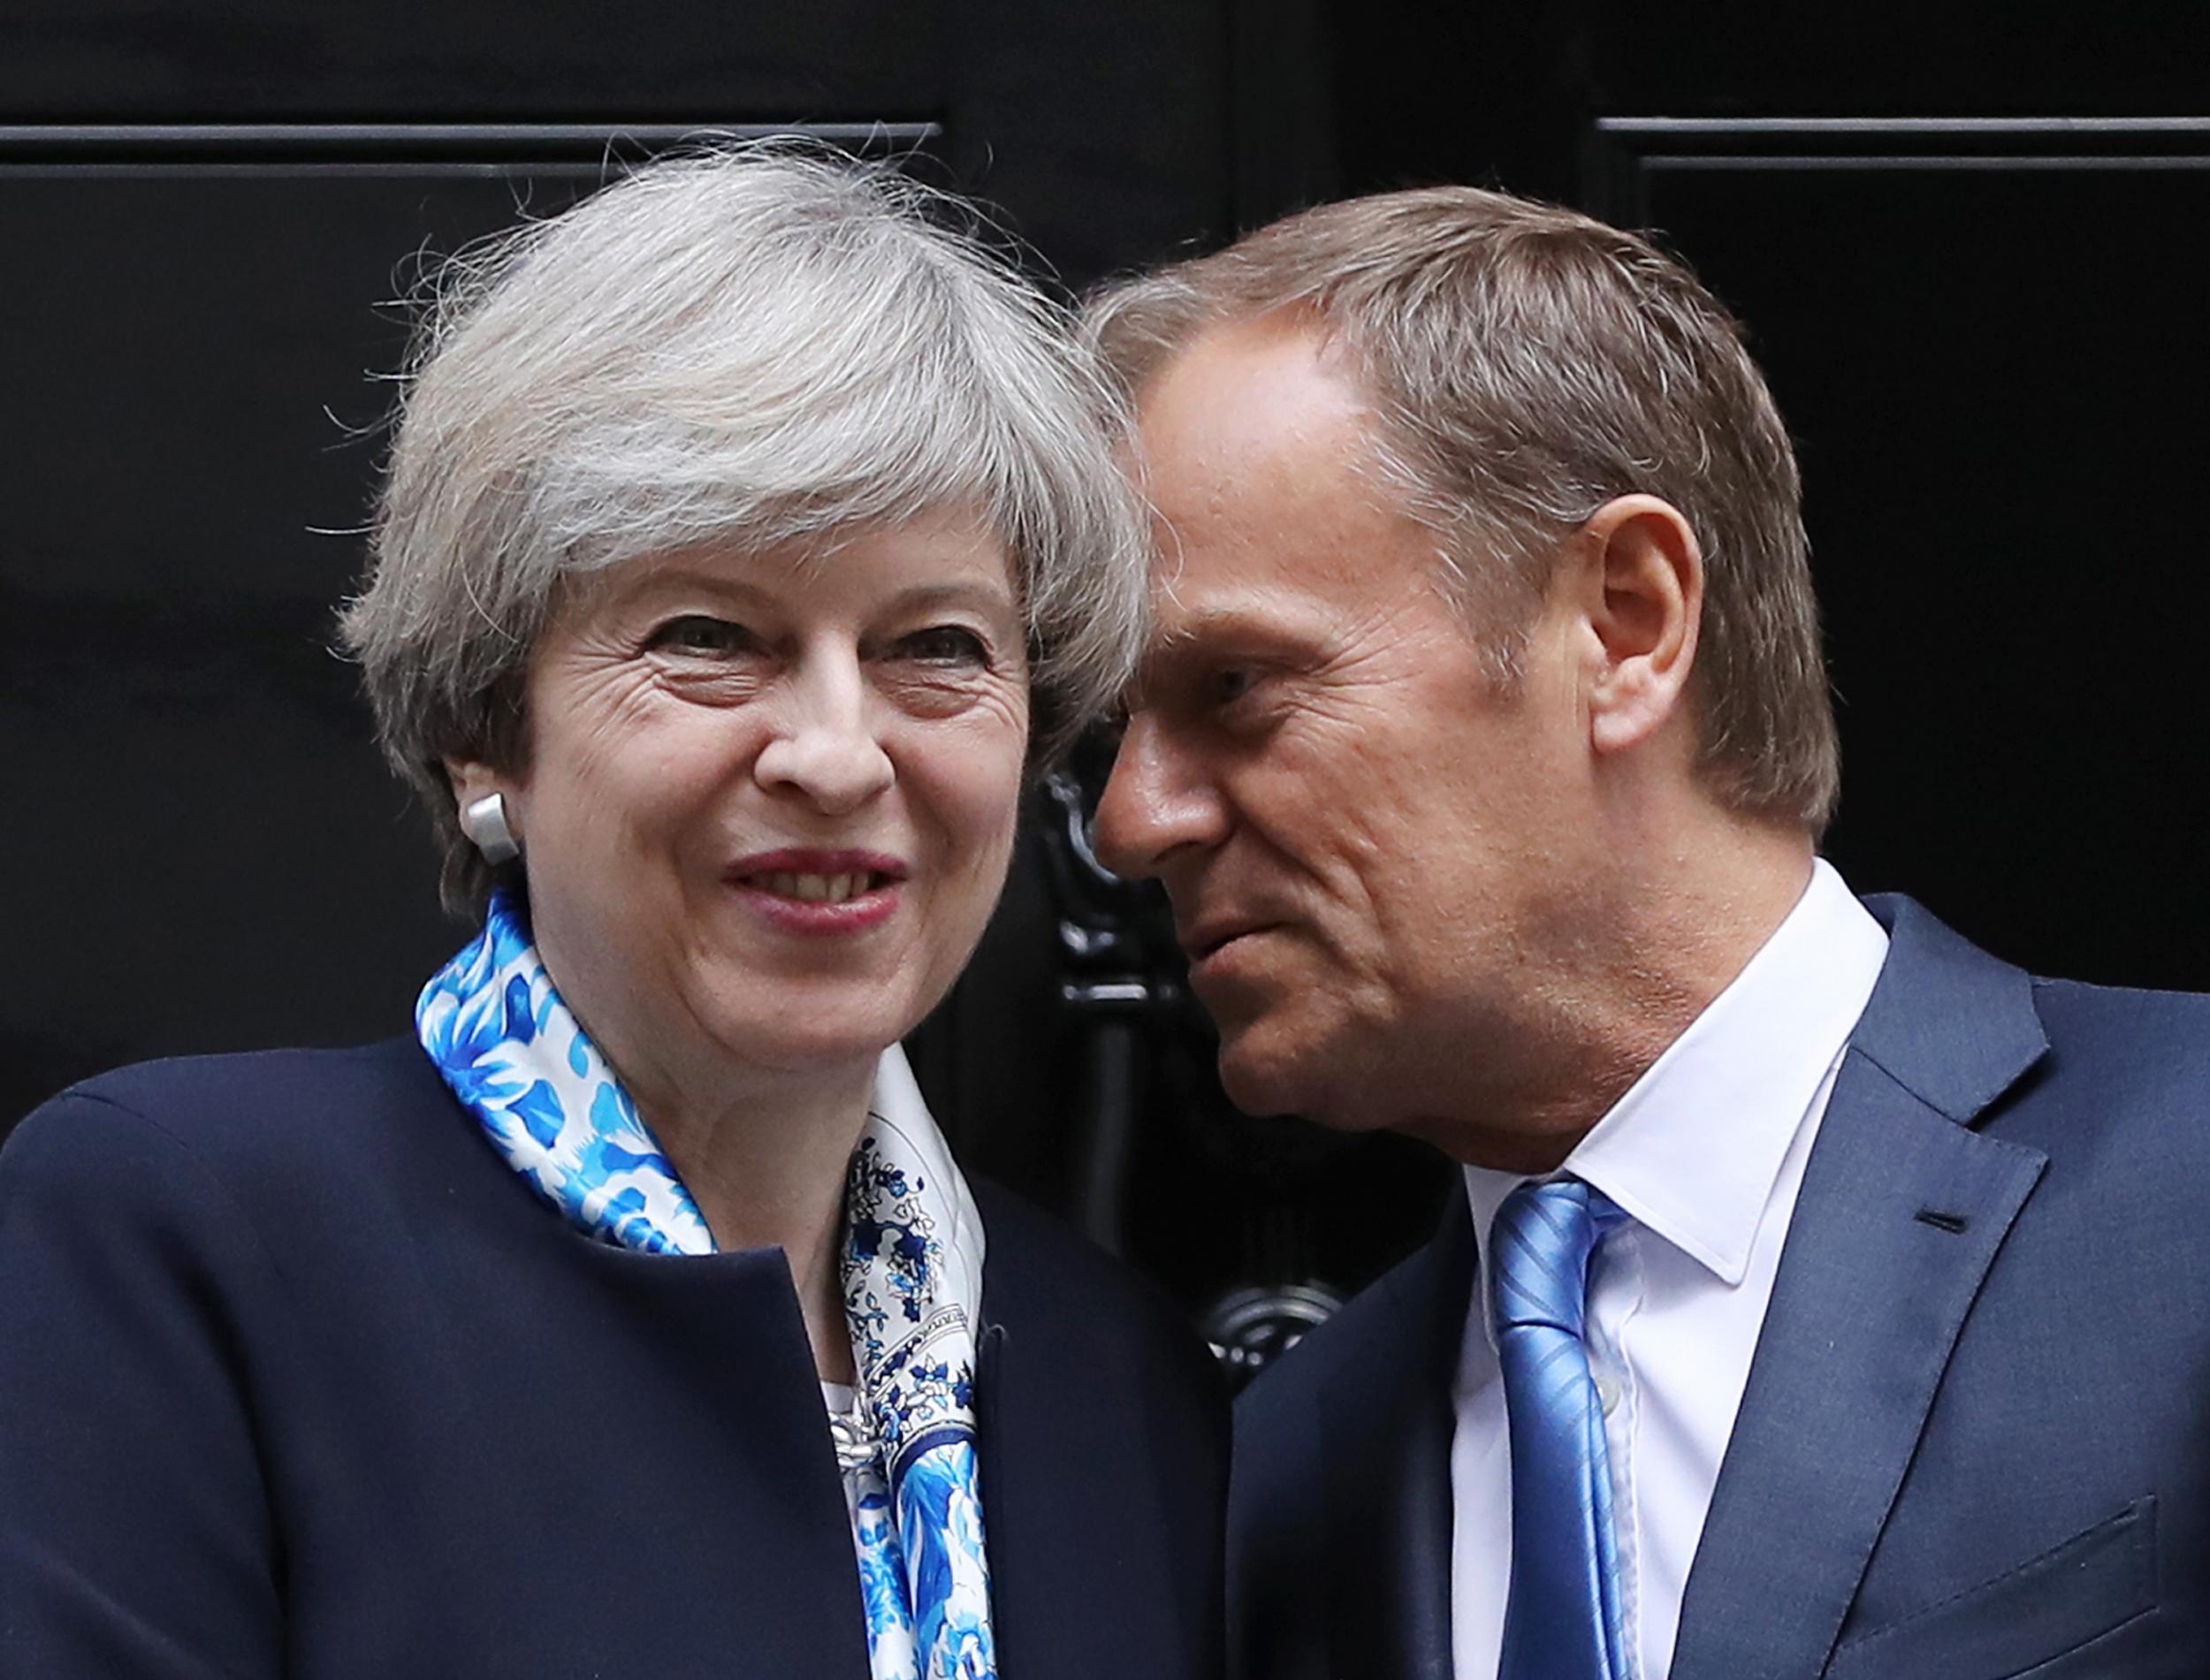 Theresa May and Donald Tusk in somewhat happier times, when they met last month at No 10